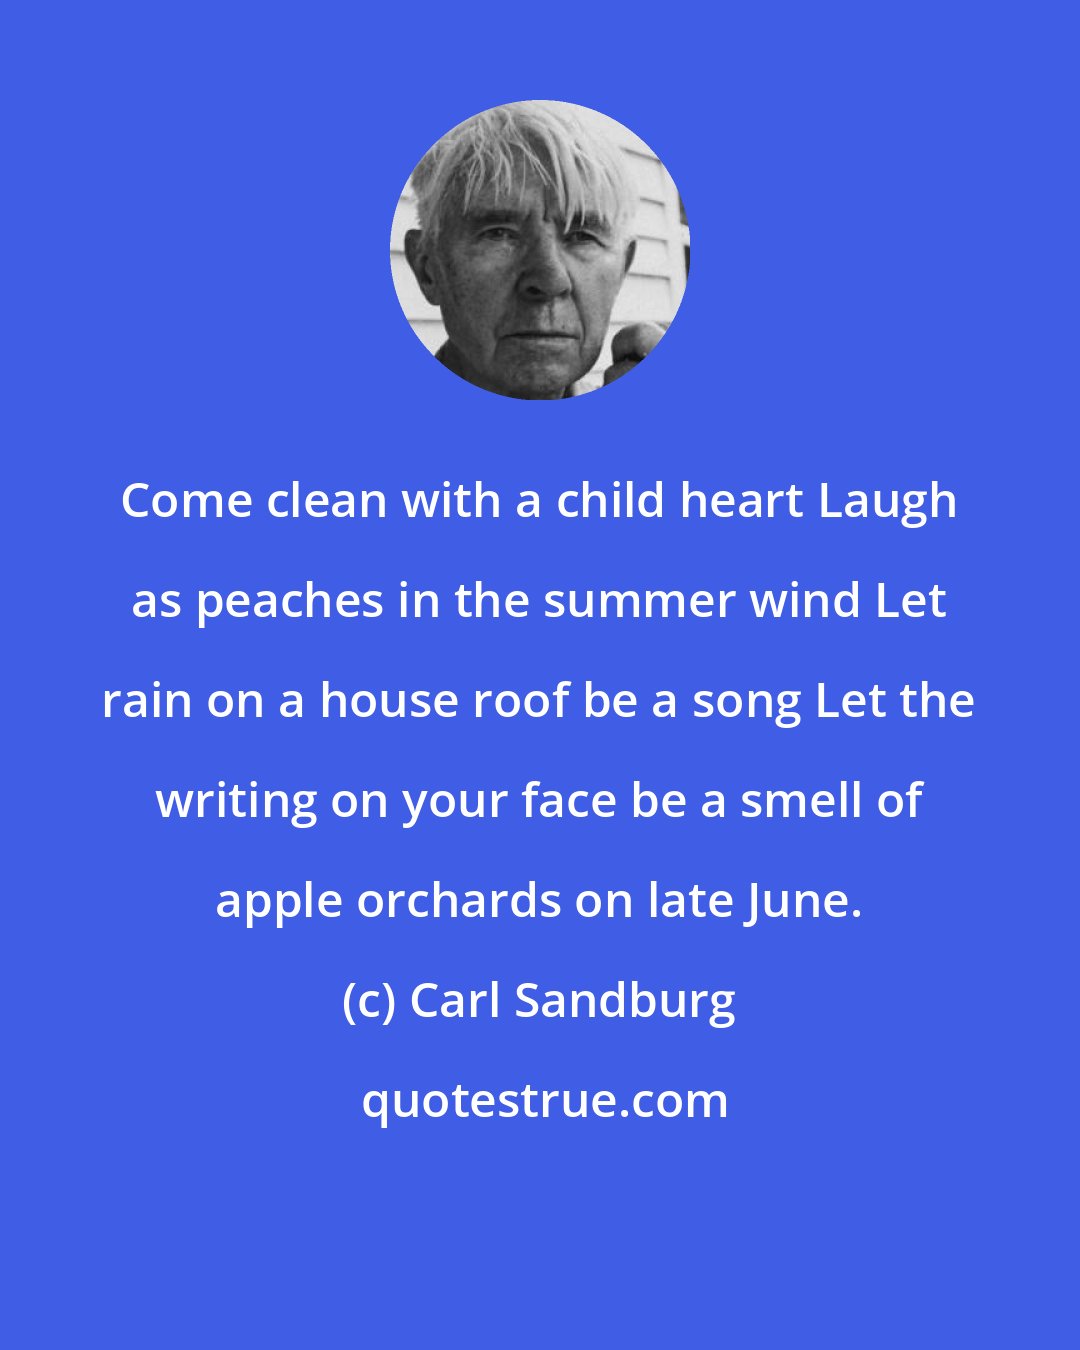 Carl Sandburg: Come clean with a child heart Laugh as peaches in the summer wind Let rain on a house roof be a song Let the writing on your face be a smell of apple orchards on late June.